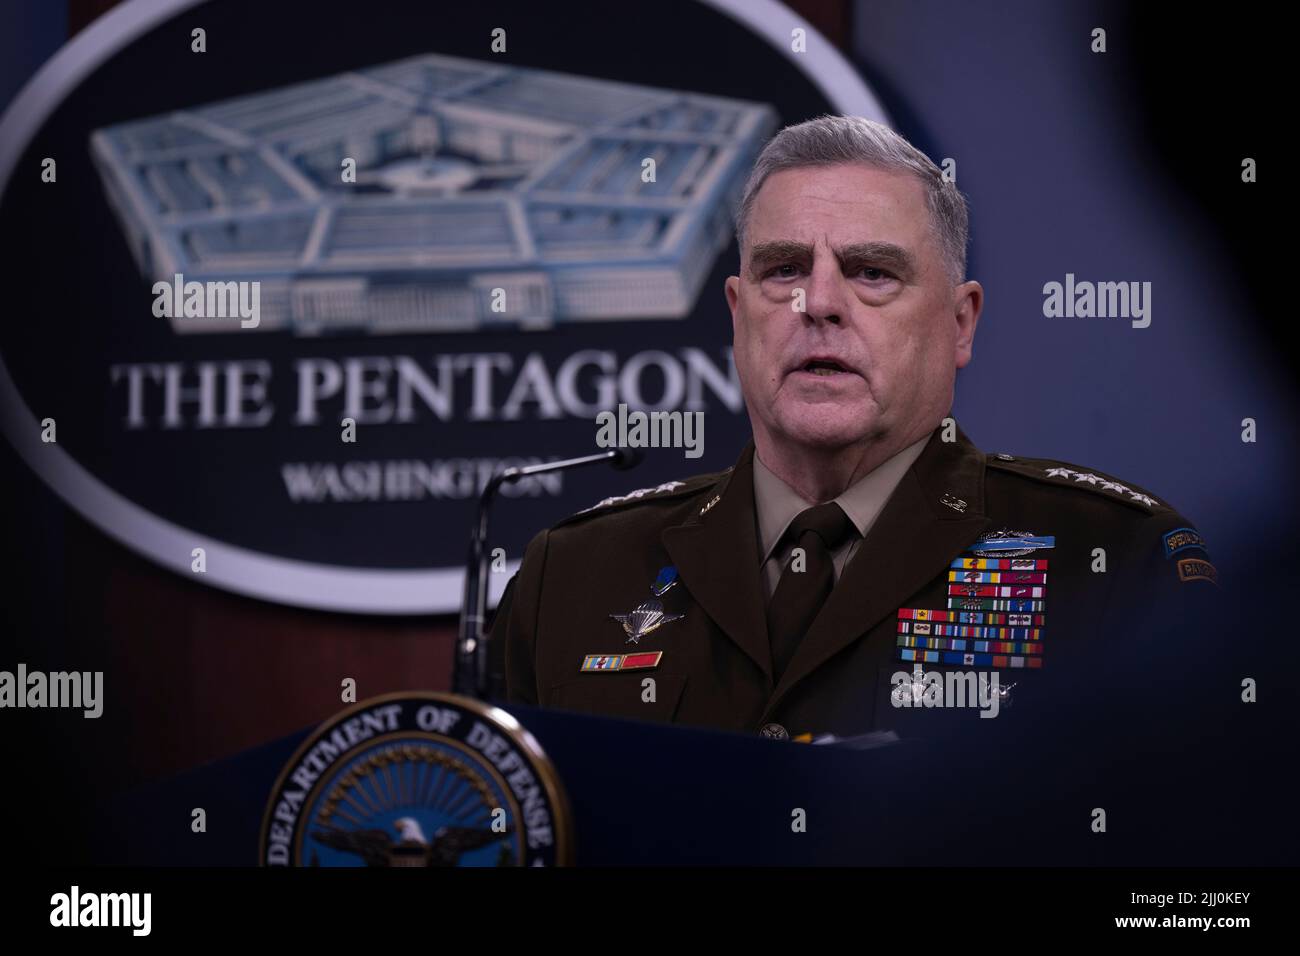 Arlington, United States Of America. 10th June, 2021. Arlington, United States of America. 10 June, 2021. U.S. Chairman of the Joint Chiefs of Staff, Gen. Mark A. Milley, responds to a question during a press conference at the Pentagon, July 20, 2022 in Arlington, Virginia. Credit: Chad J. McNeeley/DOD/Alamy Live News Stock Photo